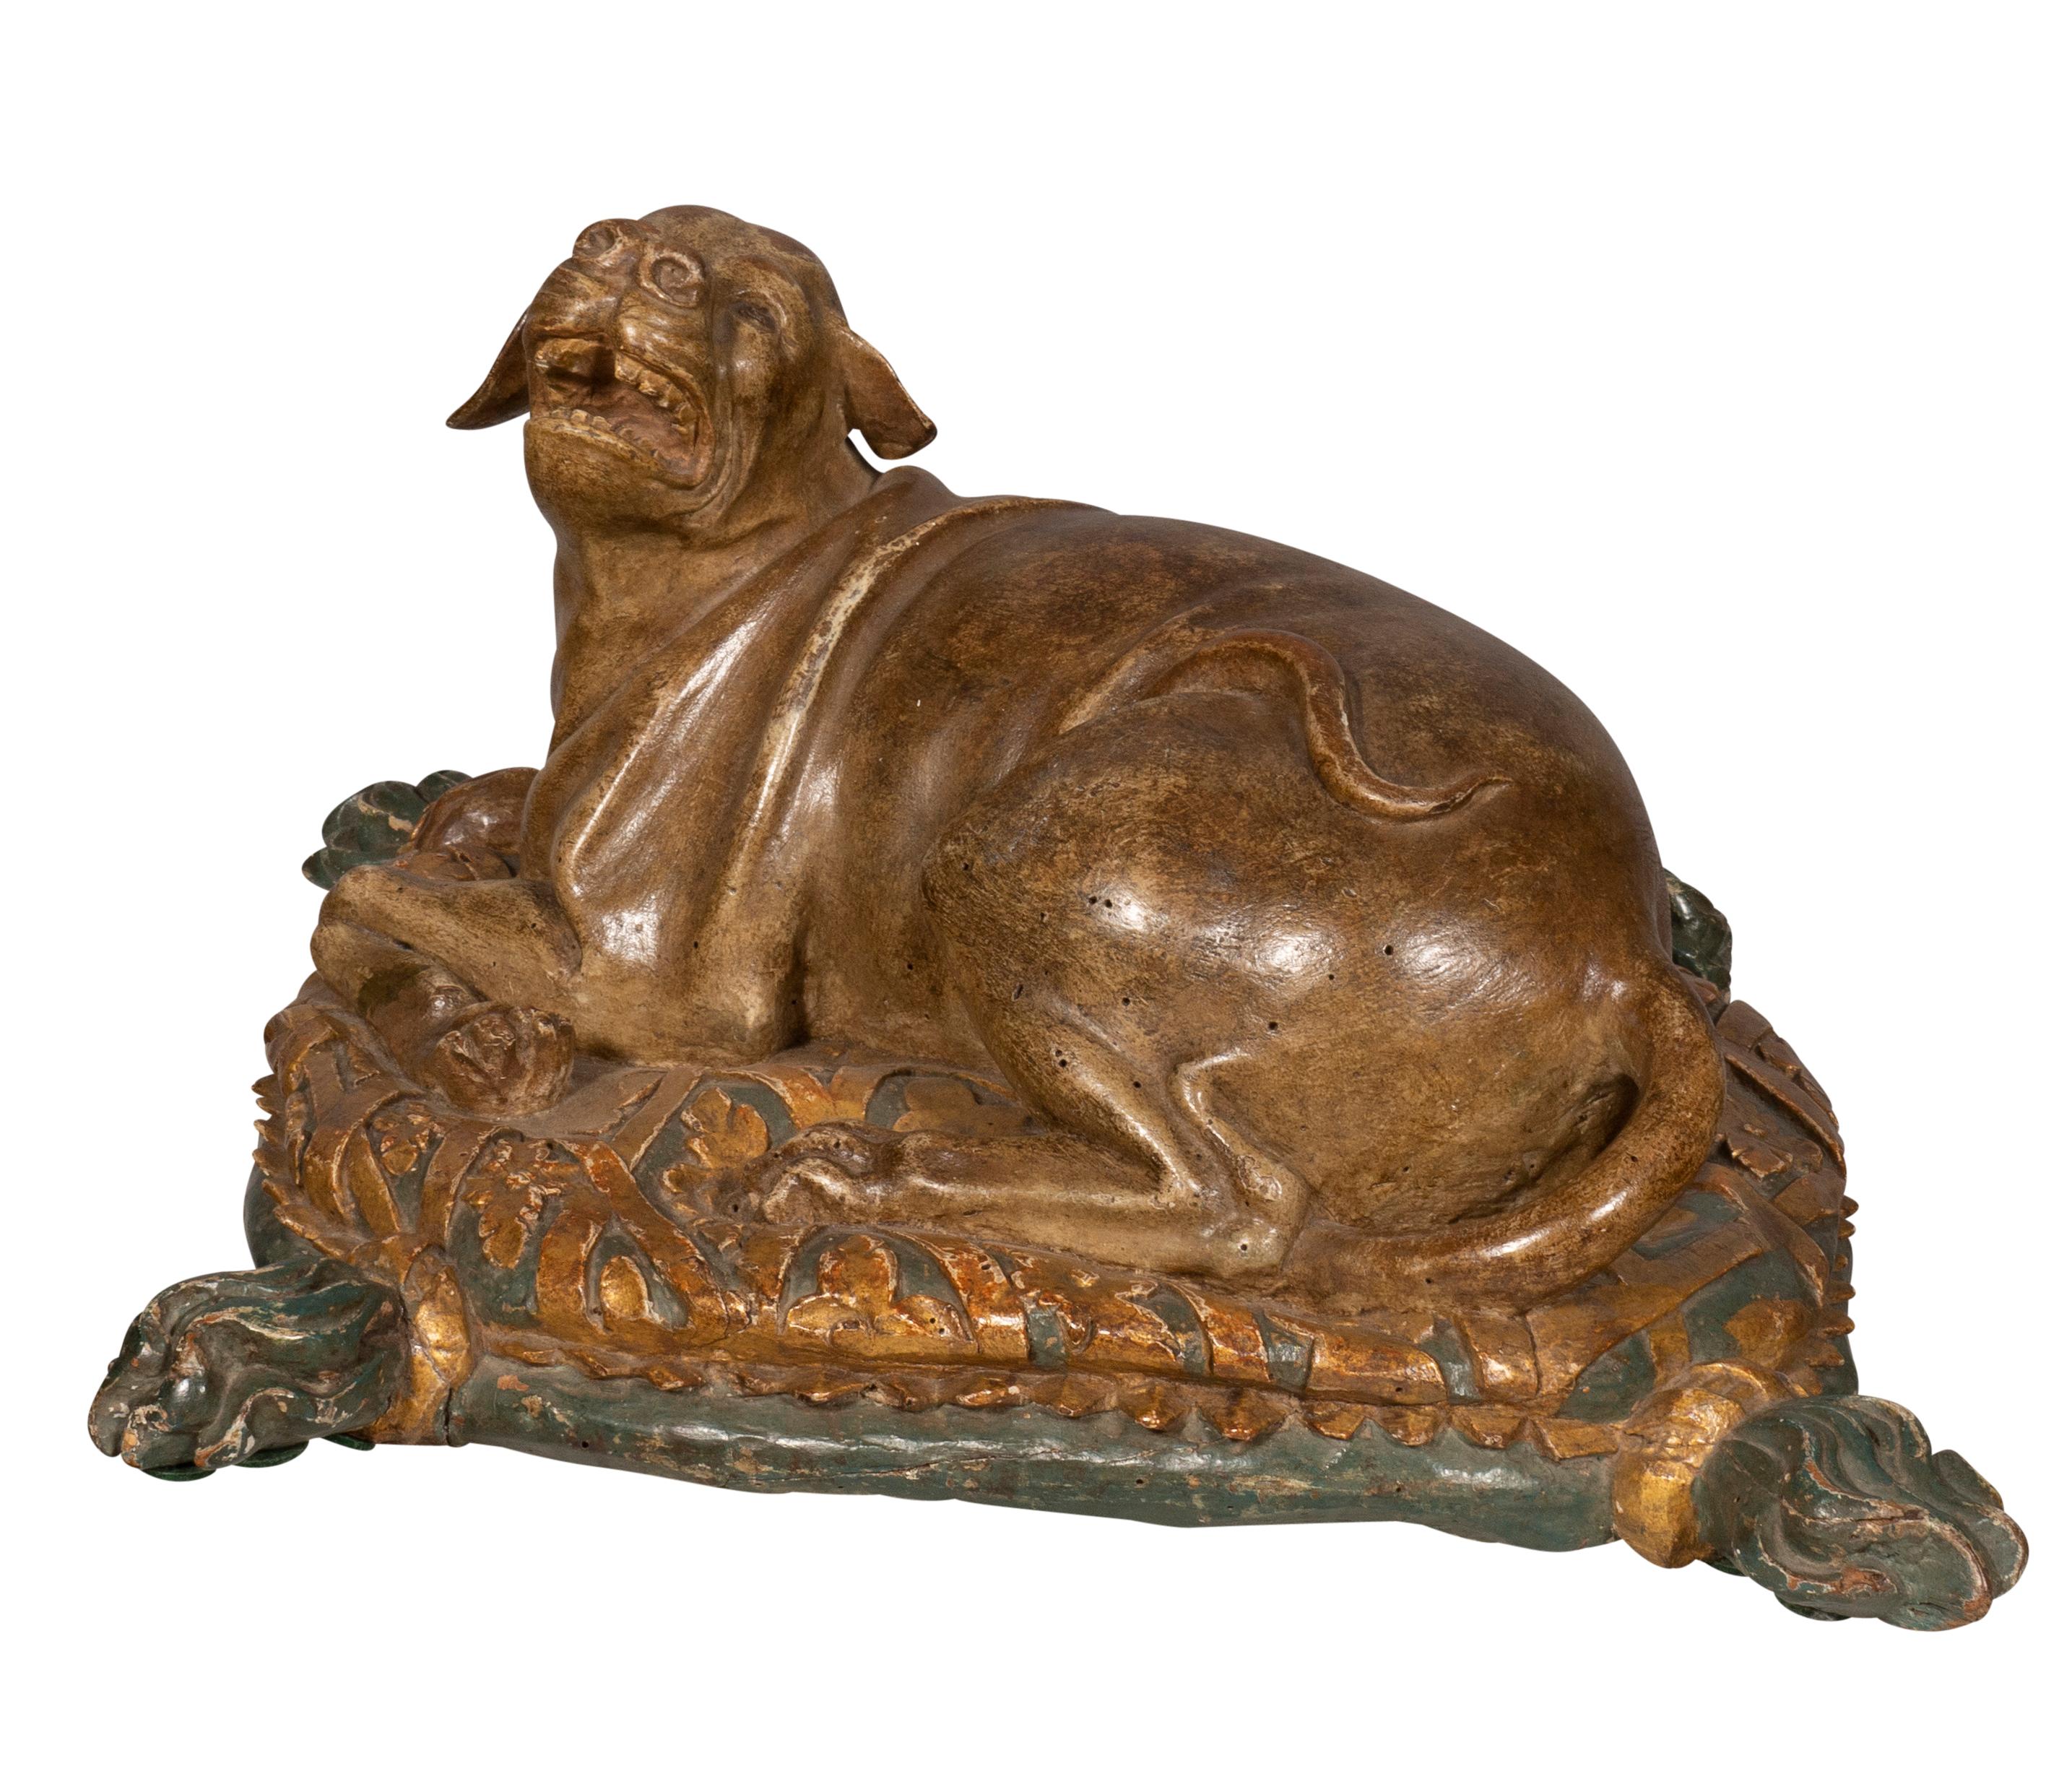 A well carved protective dog snarling on a gilded pillow with tassels.